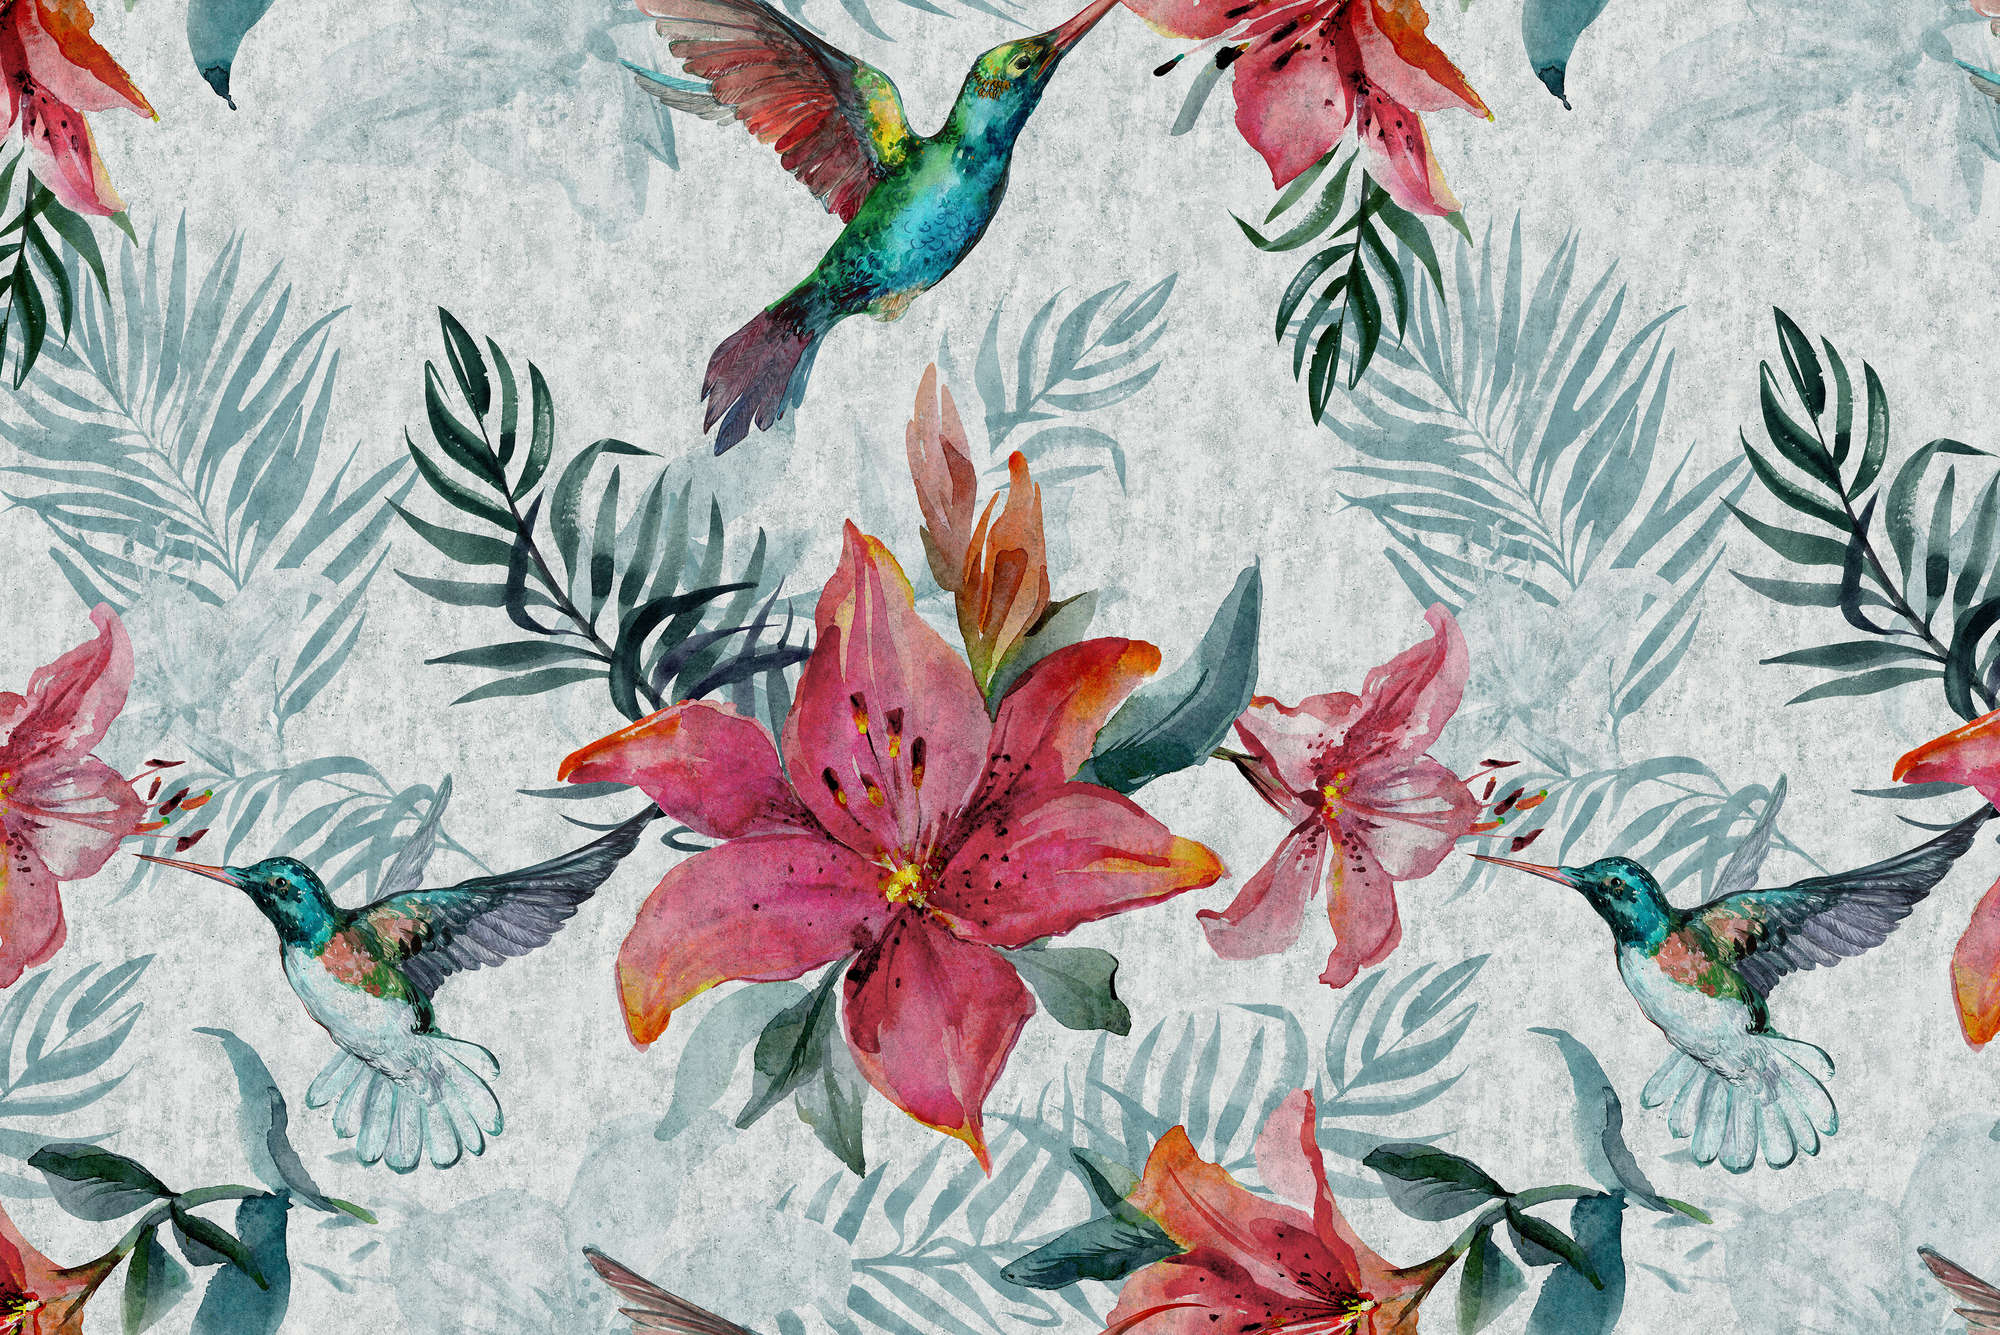             Graphic mural jungle flowers with birds on matt smooth non-woven
        